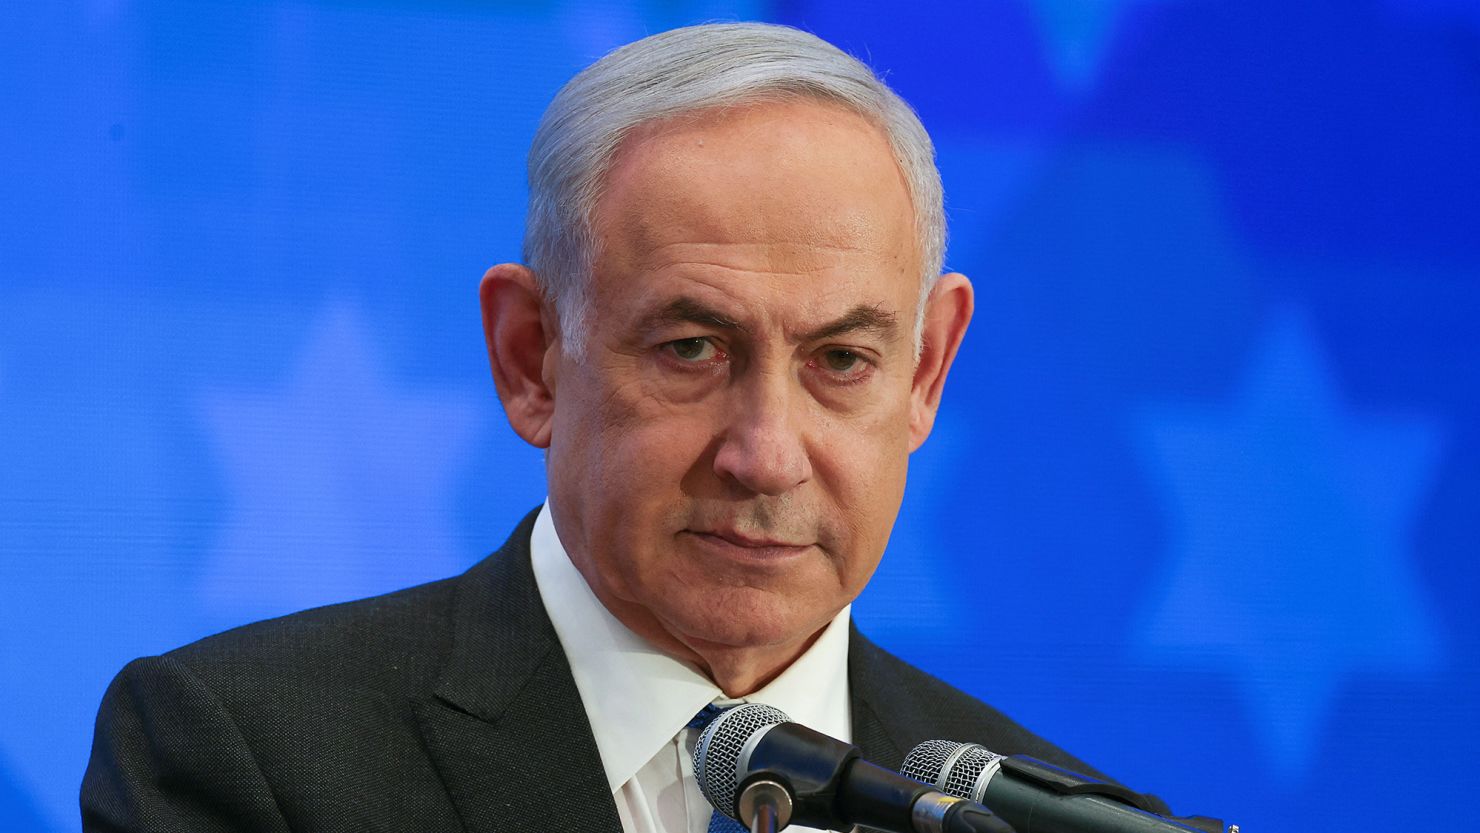 Israeli Prime Minister Benjamin Netanyahu addresses the Conference of Presidents of Major American Jewish Organizations, amid the ongoing conflict between Israel and the Palestinian Islamist group Hamas, in Jerusalem on February 18.